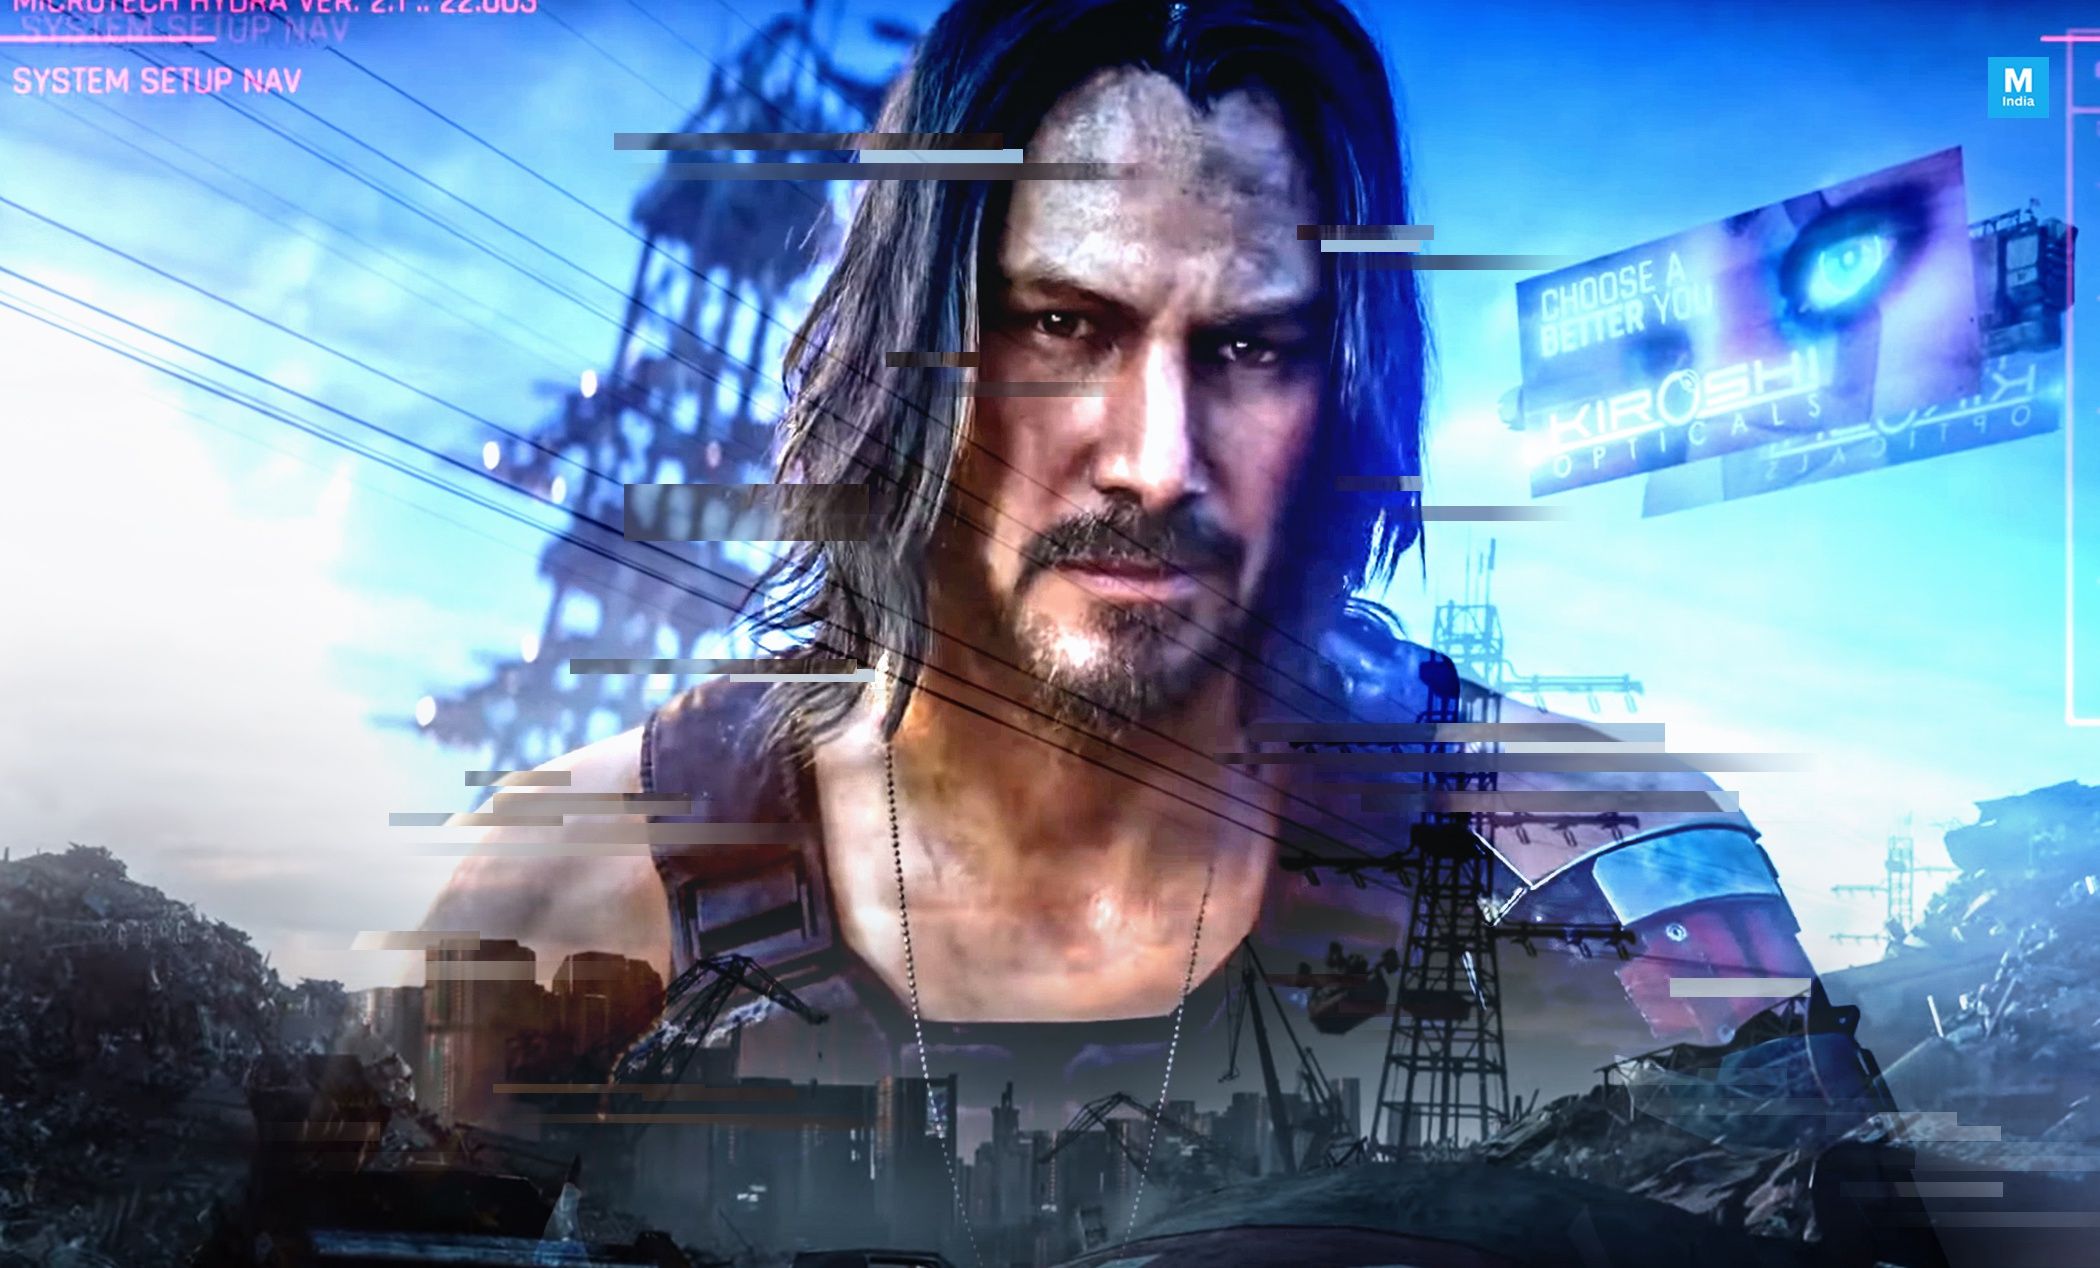 Keanu Reeves in CyberPunk 2077: Actors who appeared in Video Games